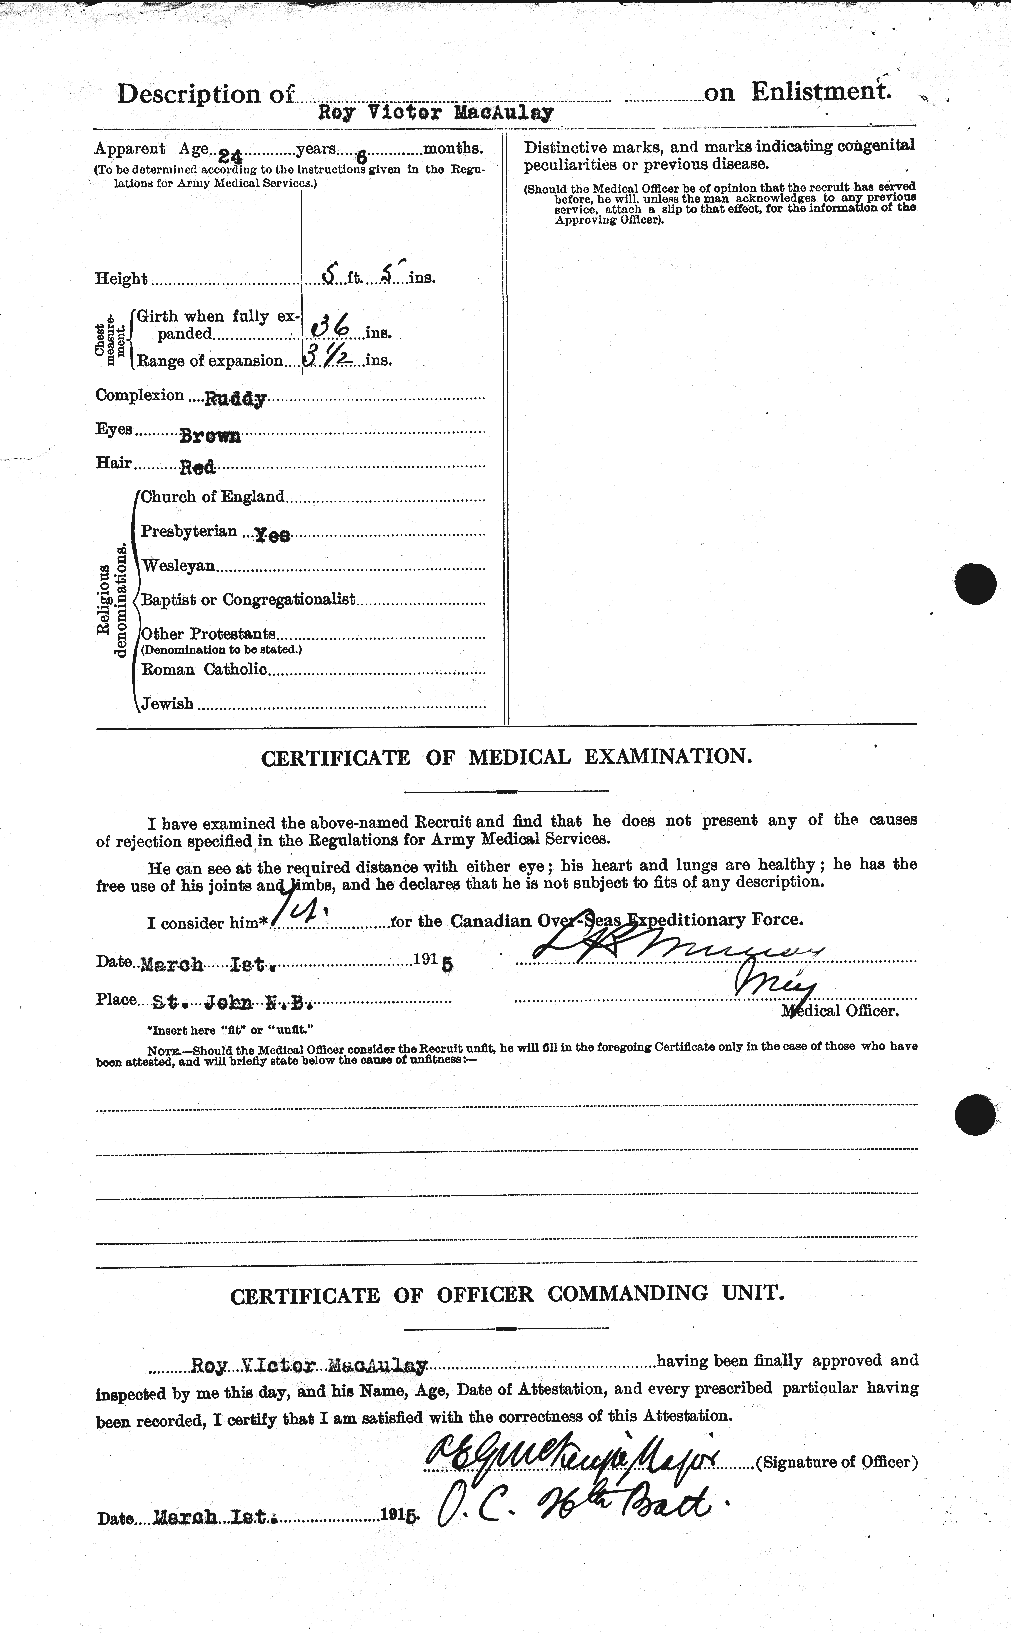 Personnel Records of the First World War - CEF 130728b